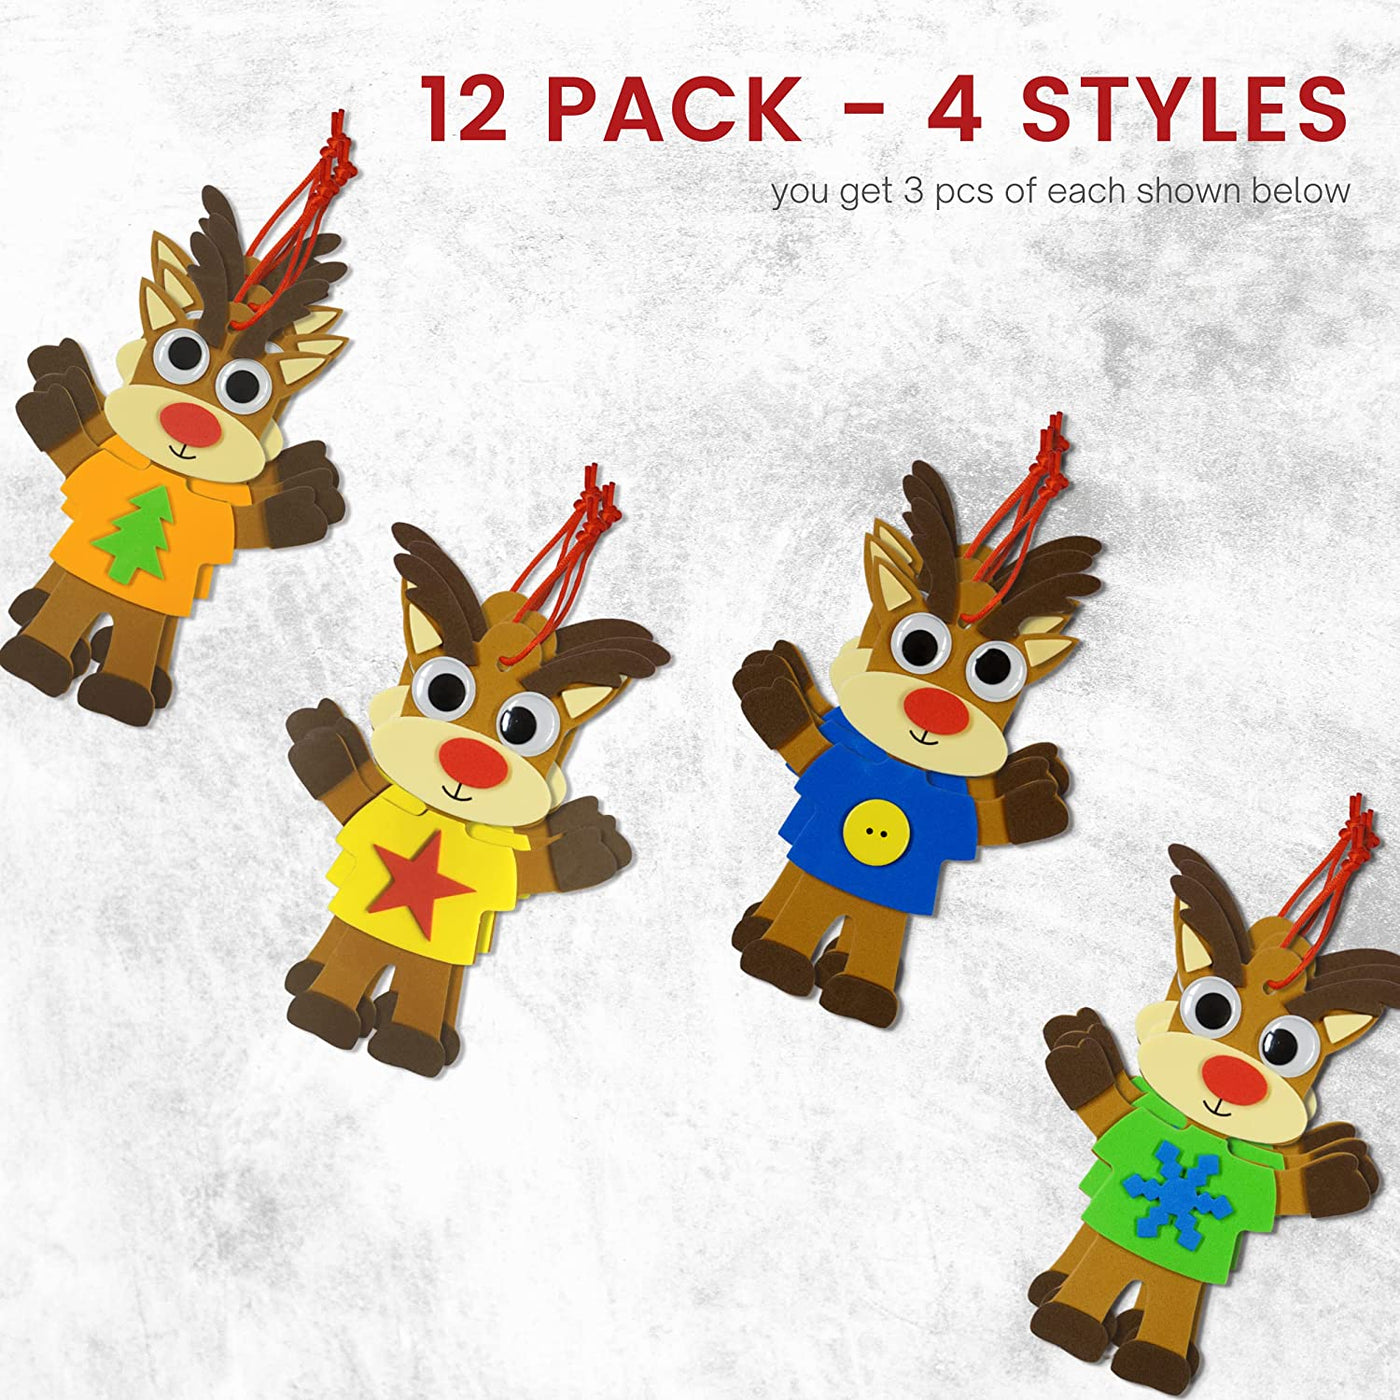 4E's Novelty Foam Christmas Reindeer Ornament Craft for Kids (12 Pack Bulk) Christmas Crafts for Kids Ages 4-8, 8-12 Toddlers DIY Ornament Craft Kit for Christmas Party Favors & Goodie Bag Fillers